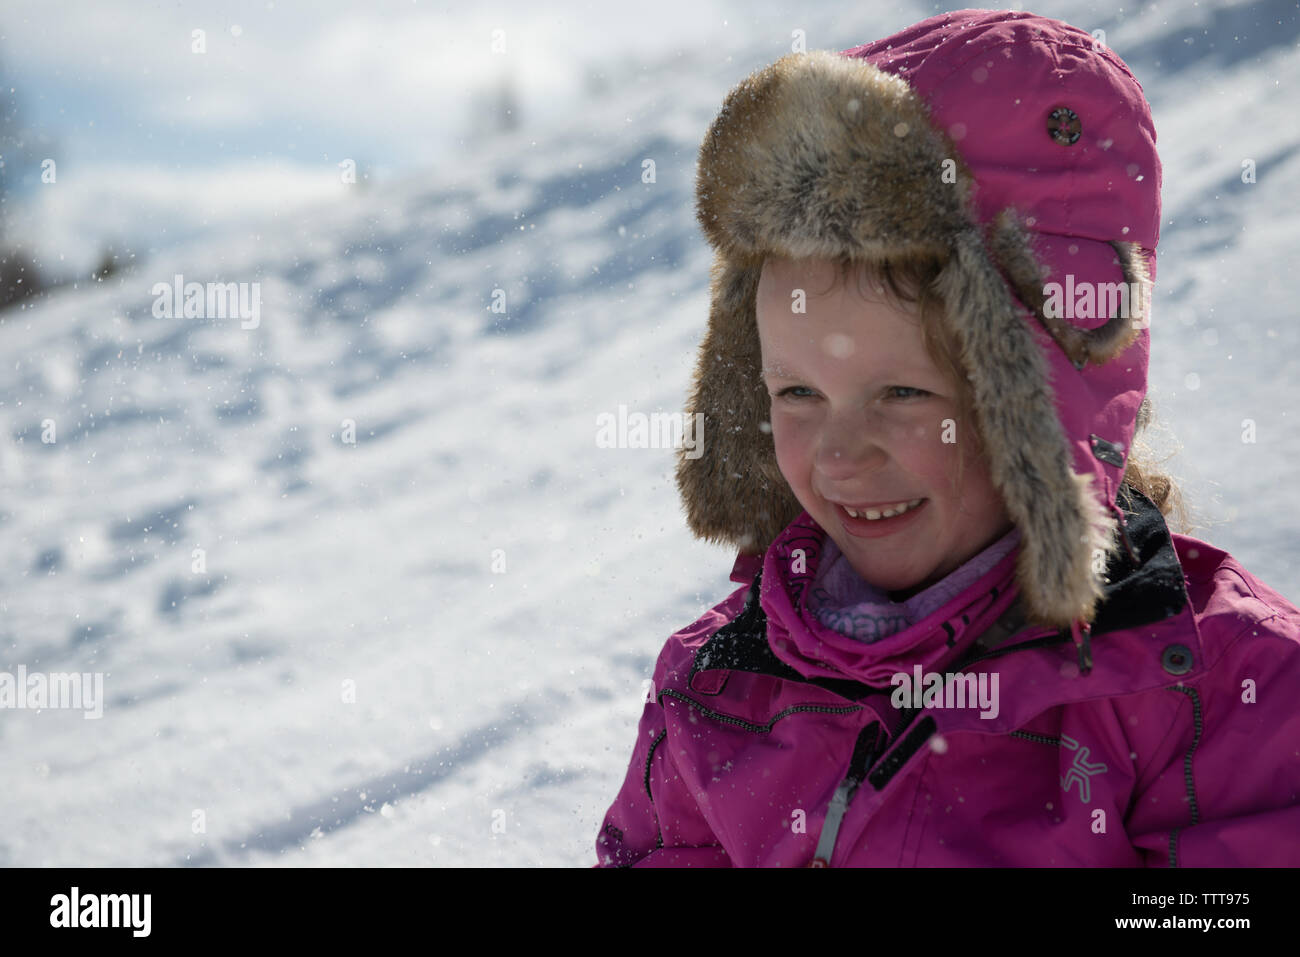 Happy girl smiling in winter wonderland with snow Stock Photo